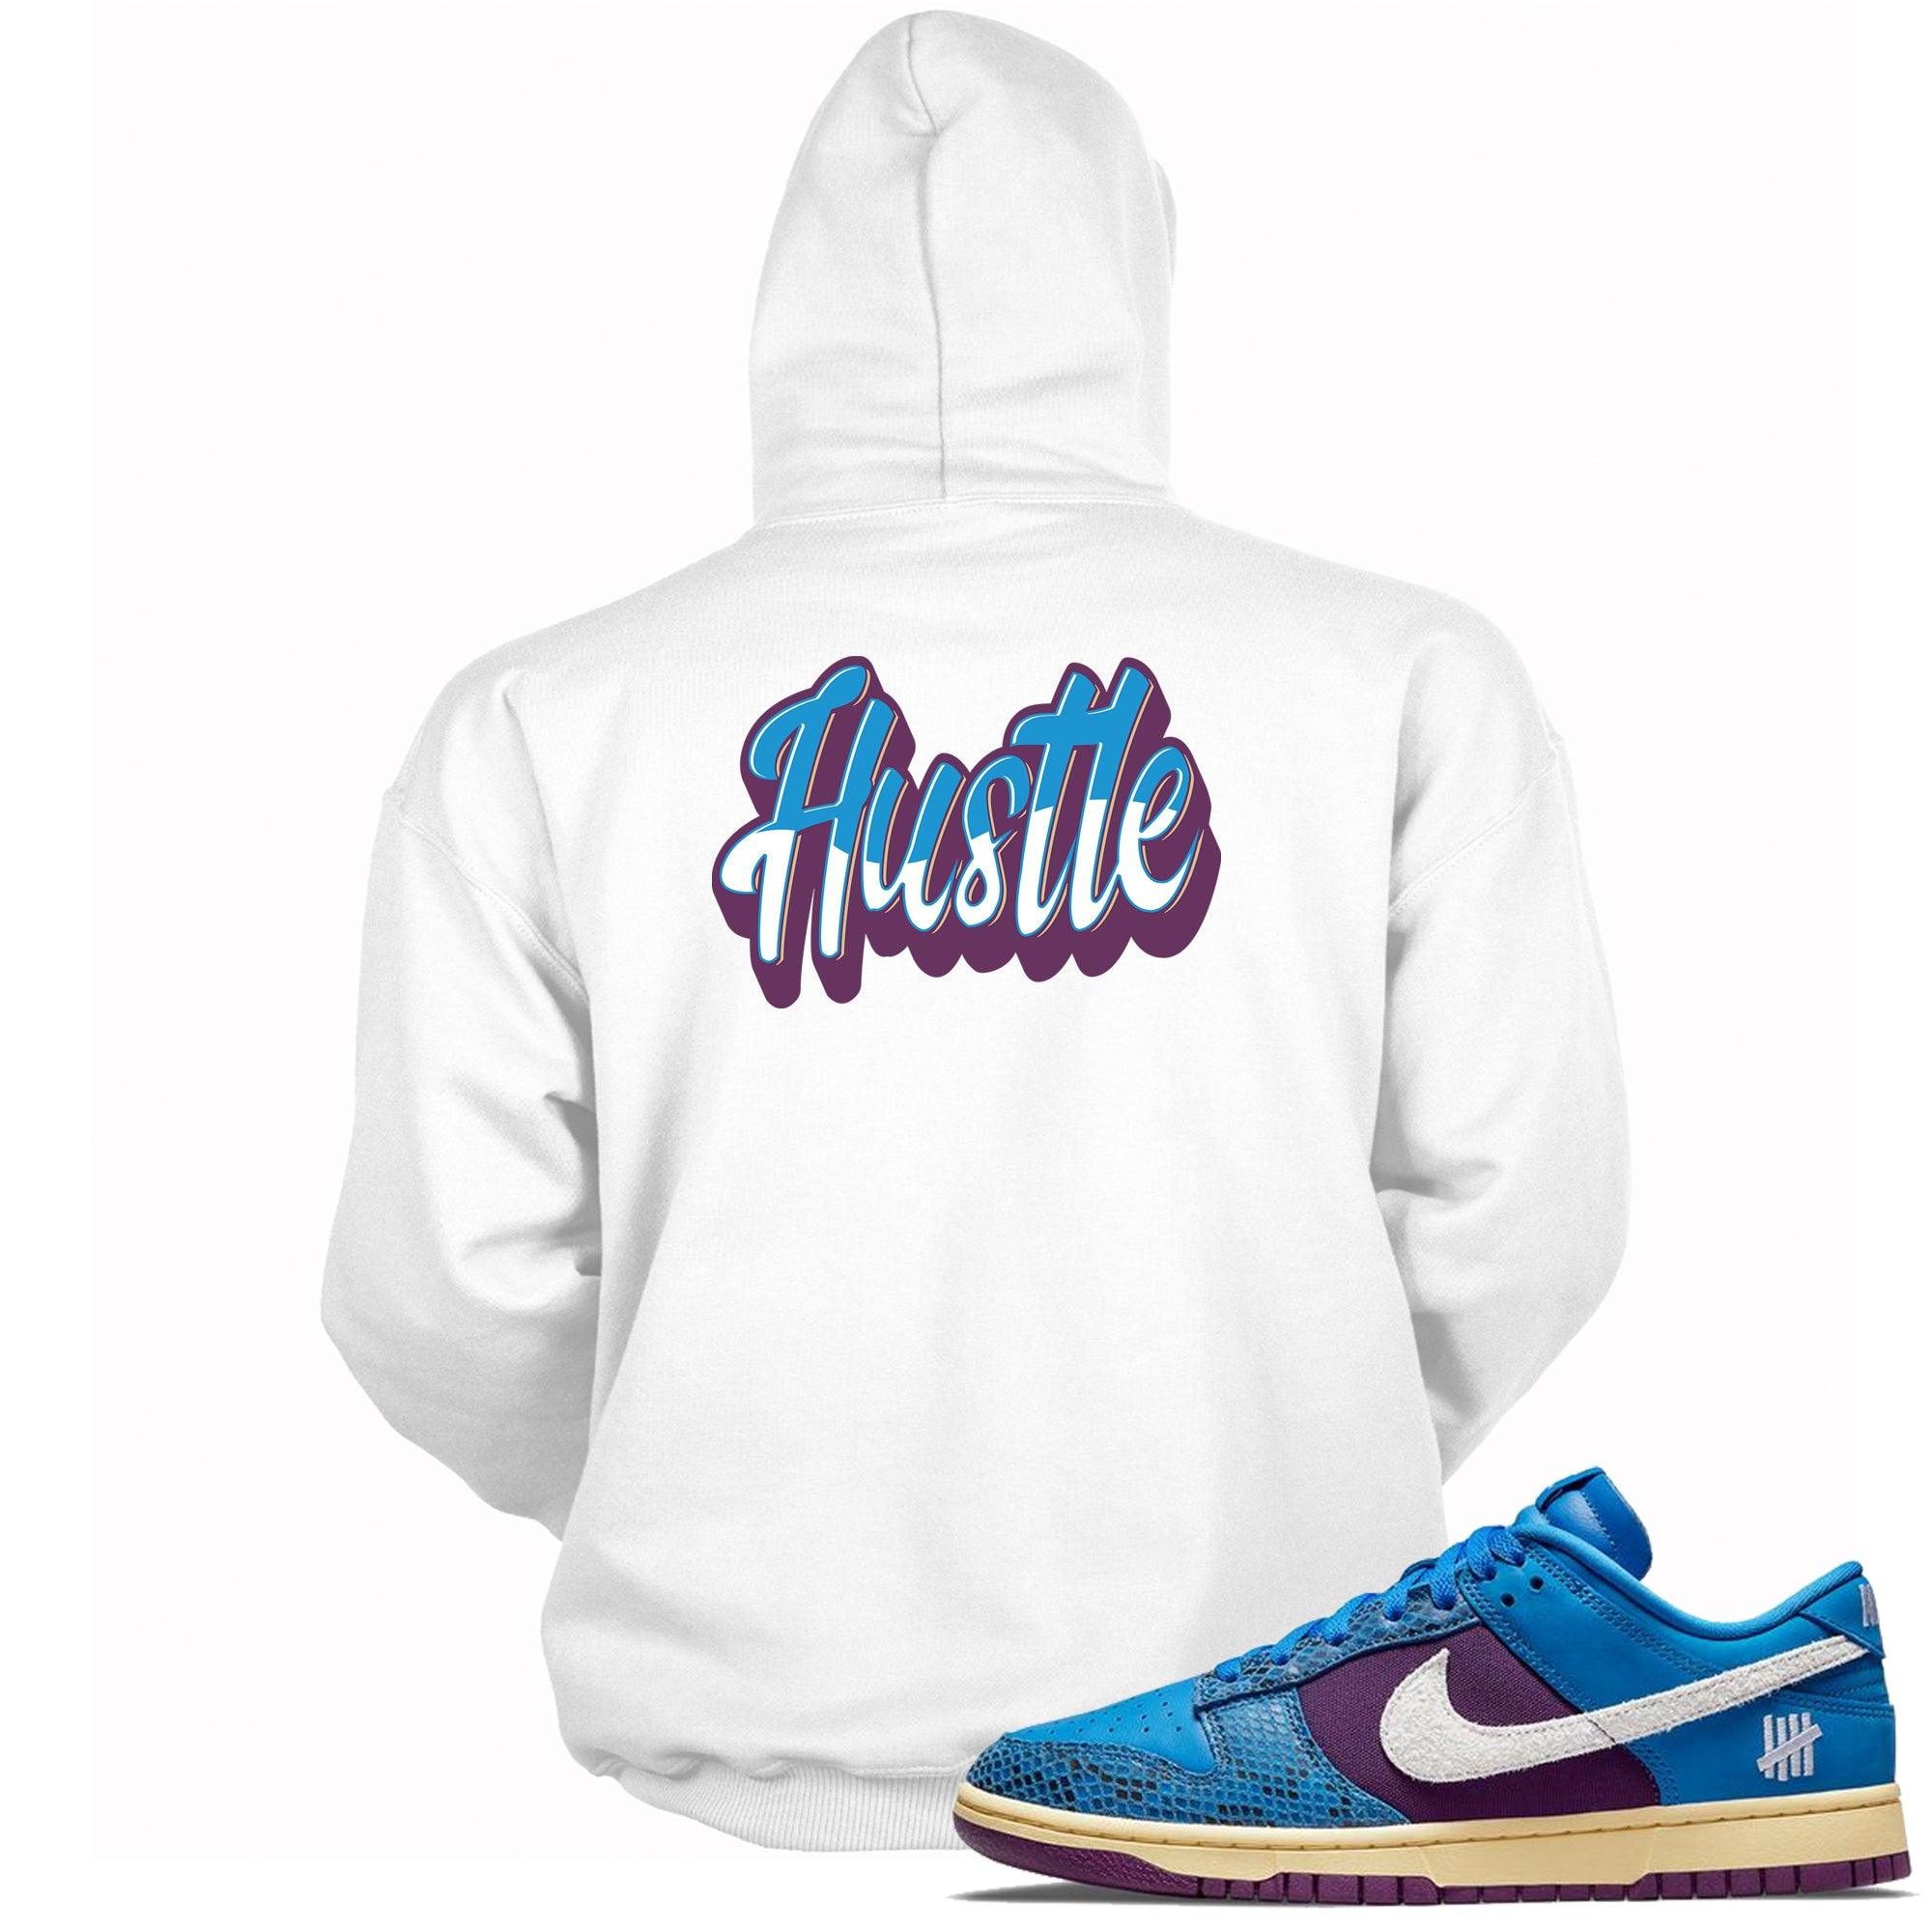 Hustle Hoodie Nike Dunks Low Undefeated 5 On It Dunk vs AF1 photo